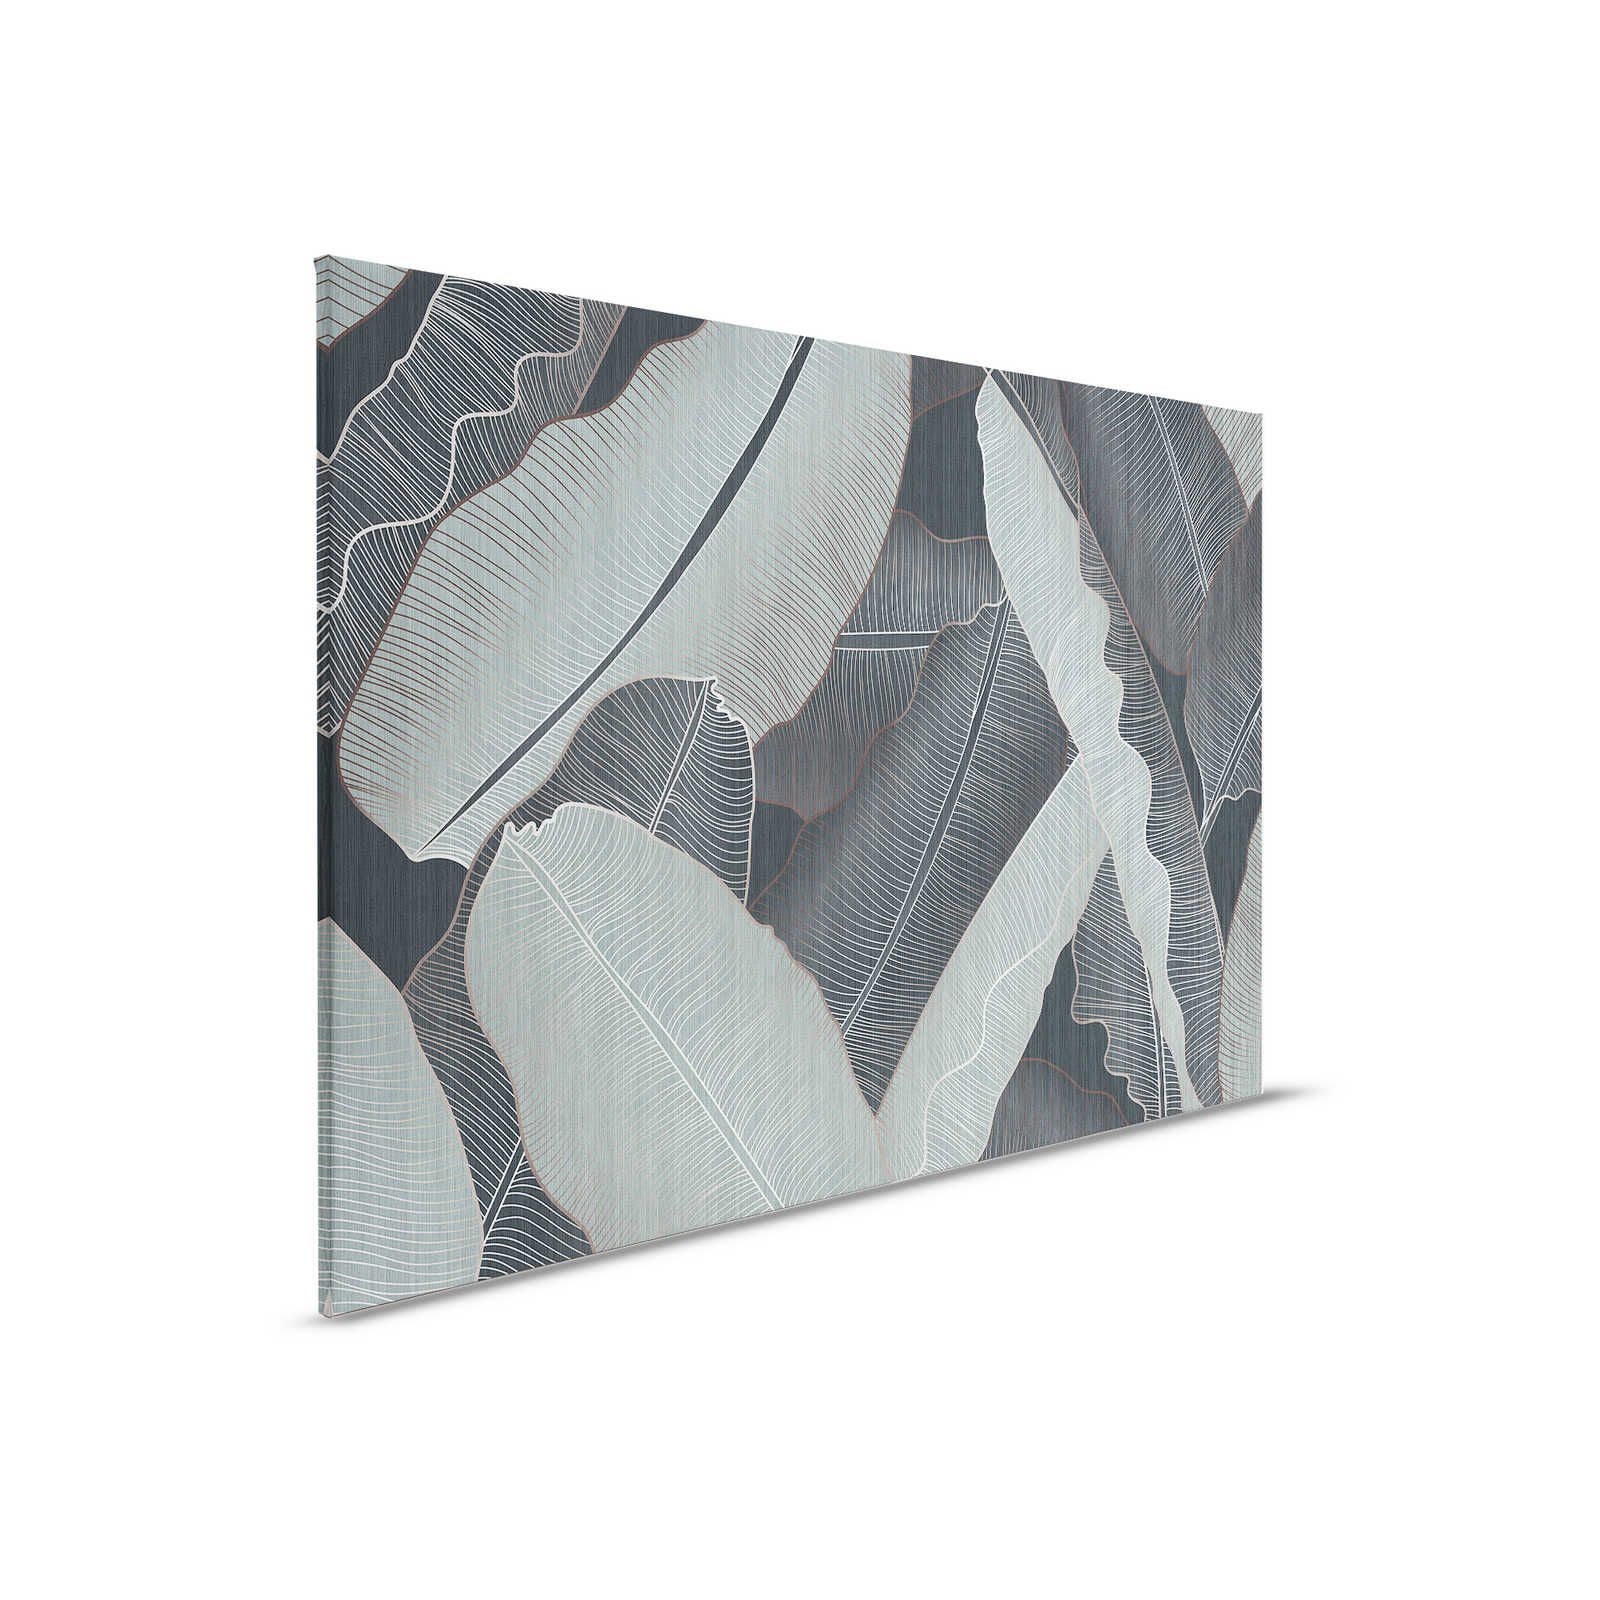 Under Cover 1 - Palm Leaf Canvas Painting Grey & Pale Green Drawing Style - 0.90 m x 0.60 m
